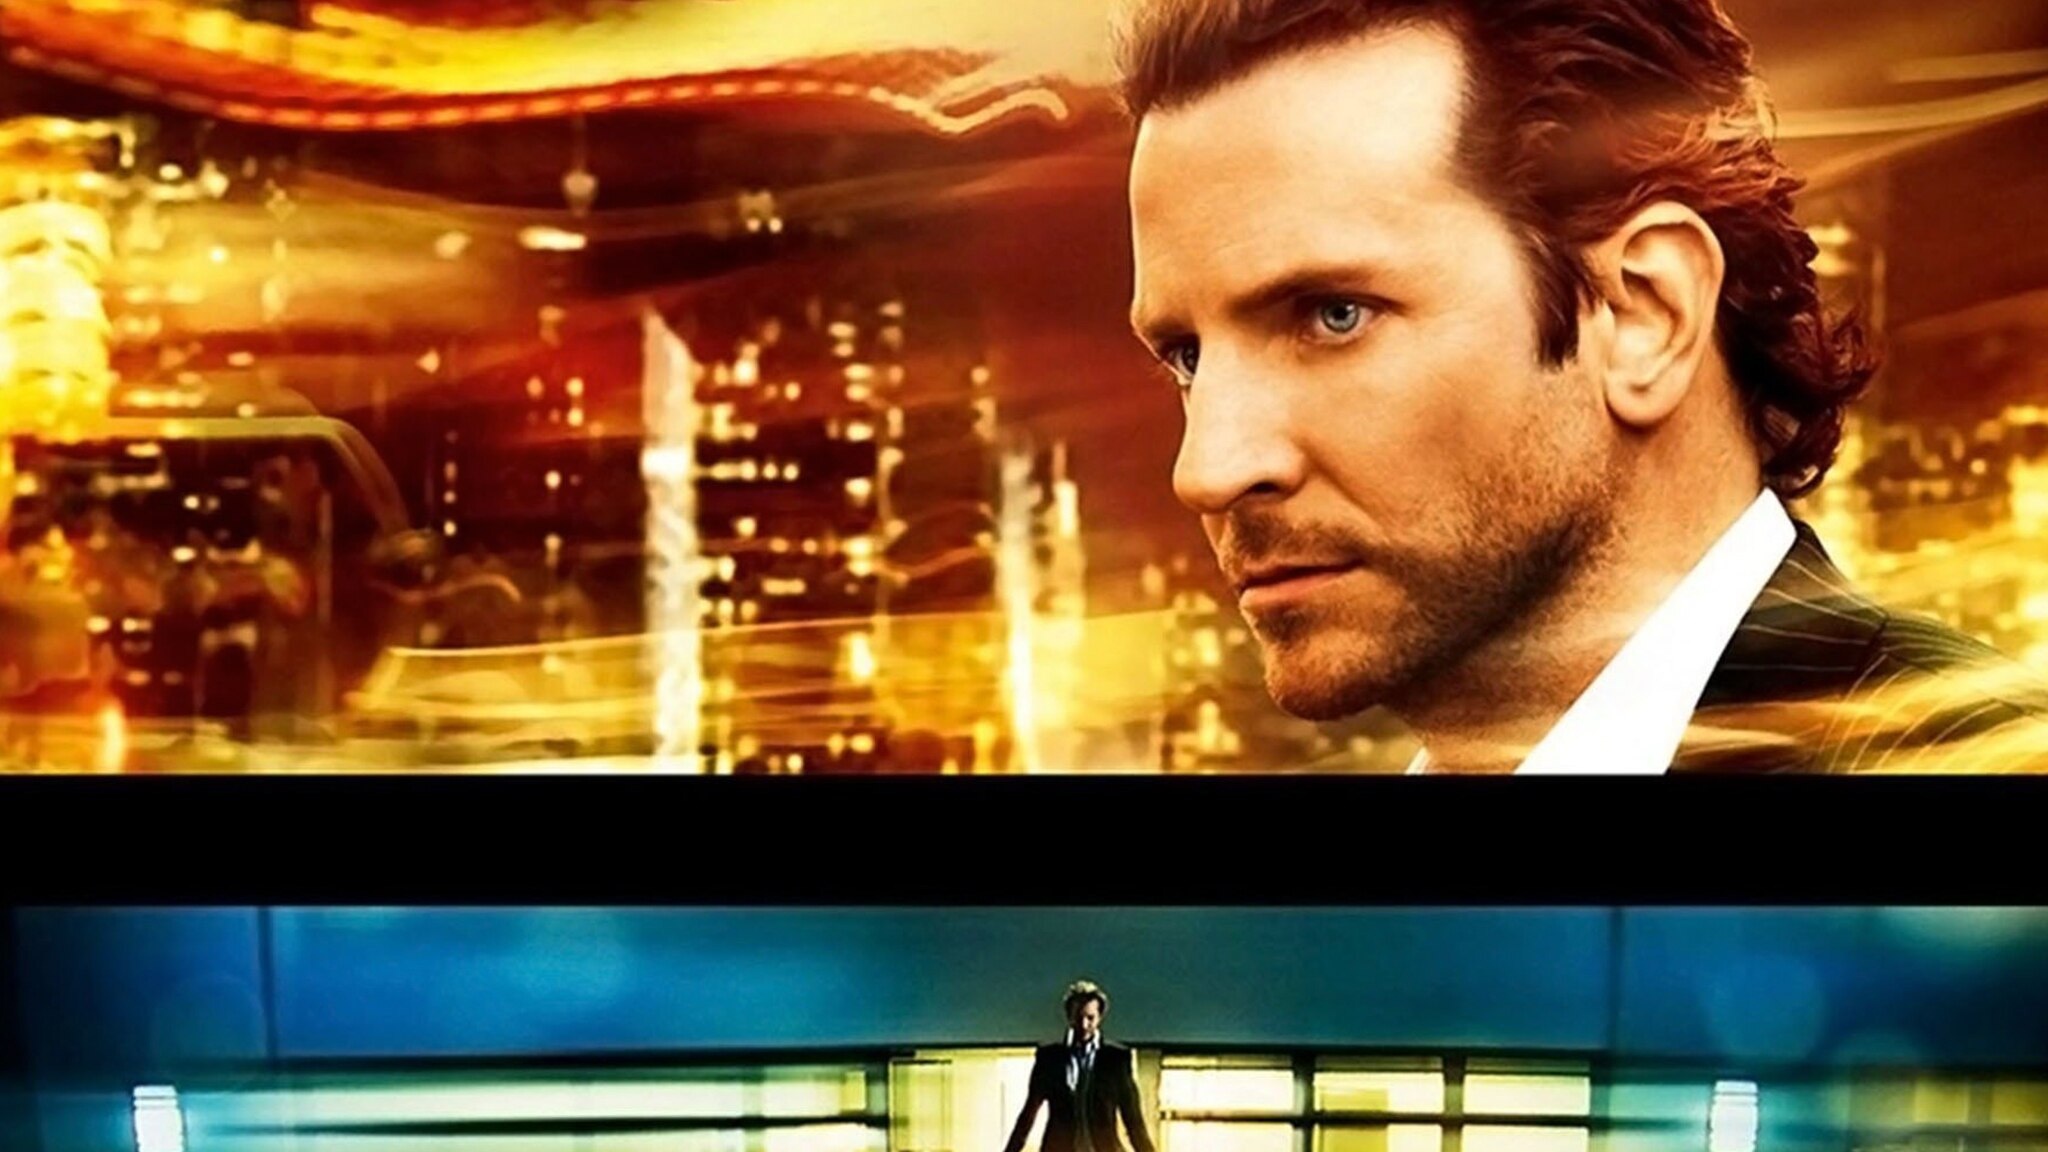 HD wallpaper, Limitless Movie, 2050X1160 Hd Desktop, Sophisticated Storytelling, Boundless Potential, Edge Of Your Seat, Desktop Hd Limitless Movie Background Image